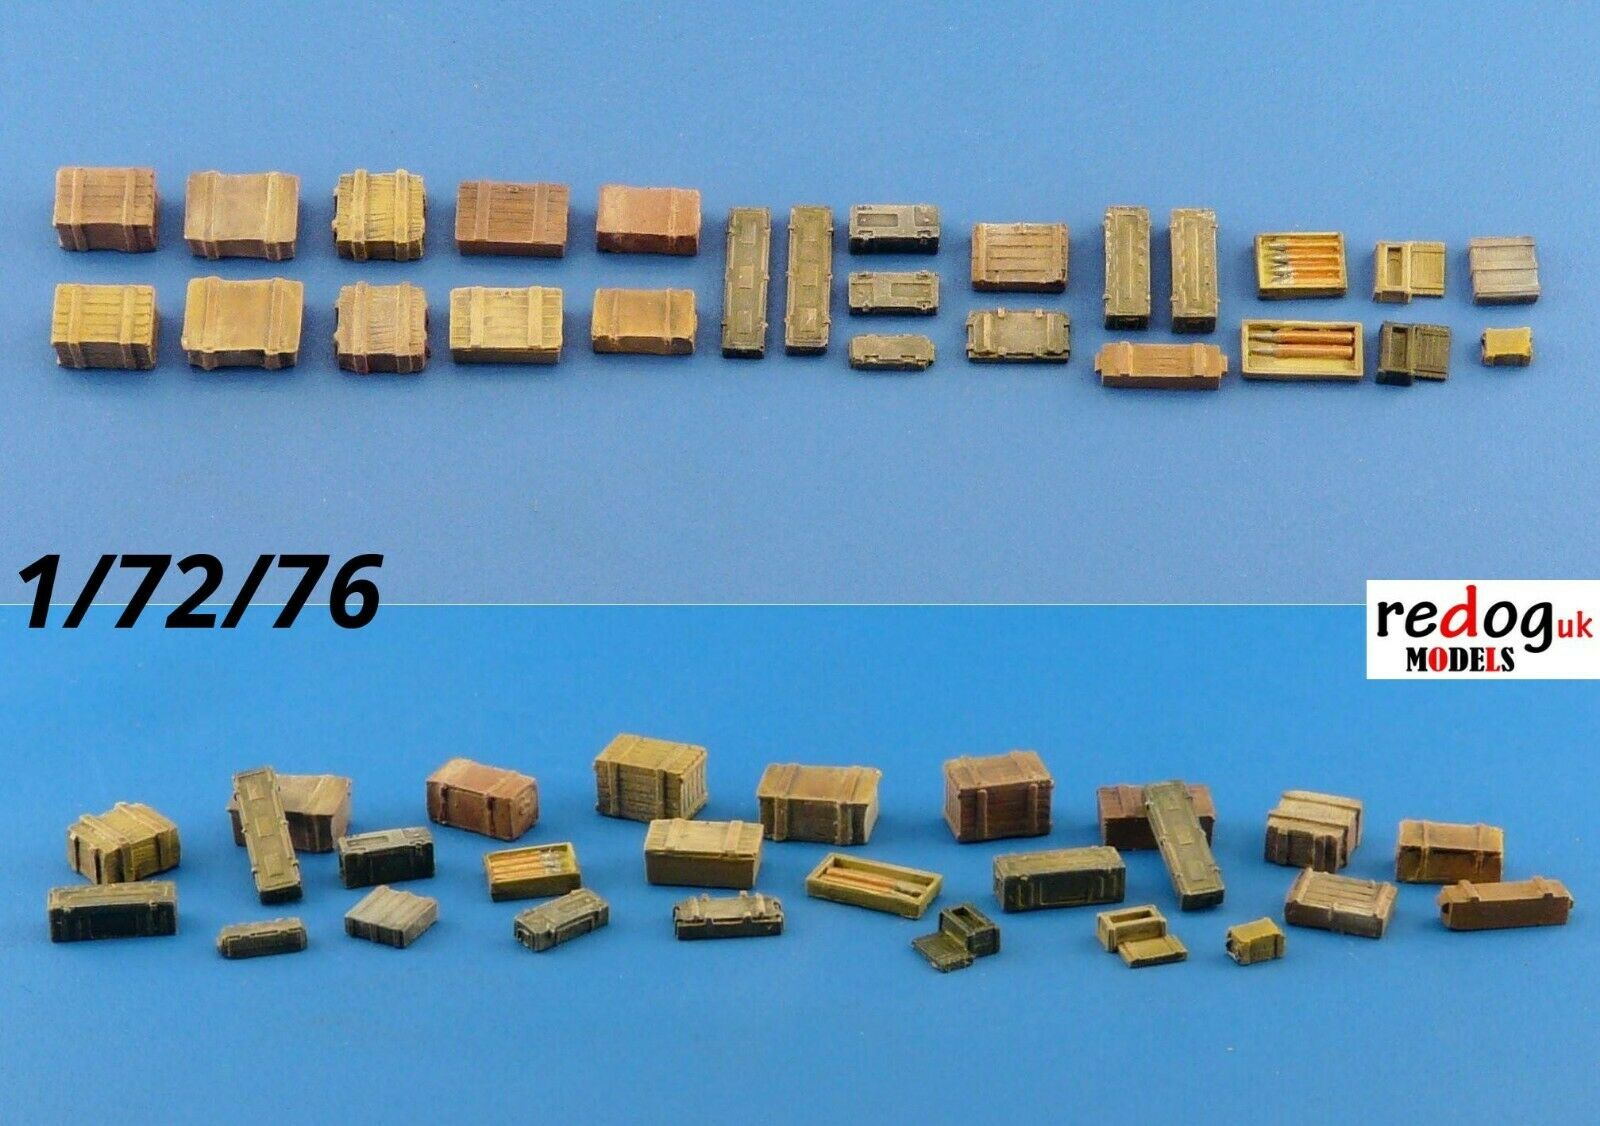 1/72  Crate and Boxes 33 Pieces Scale Modelling Resin Stowage Kit   B3 - redoguk